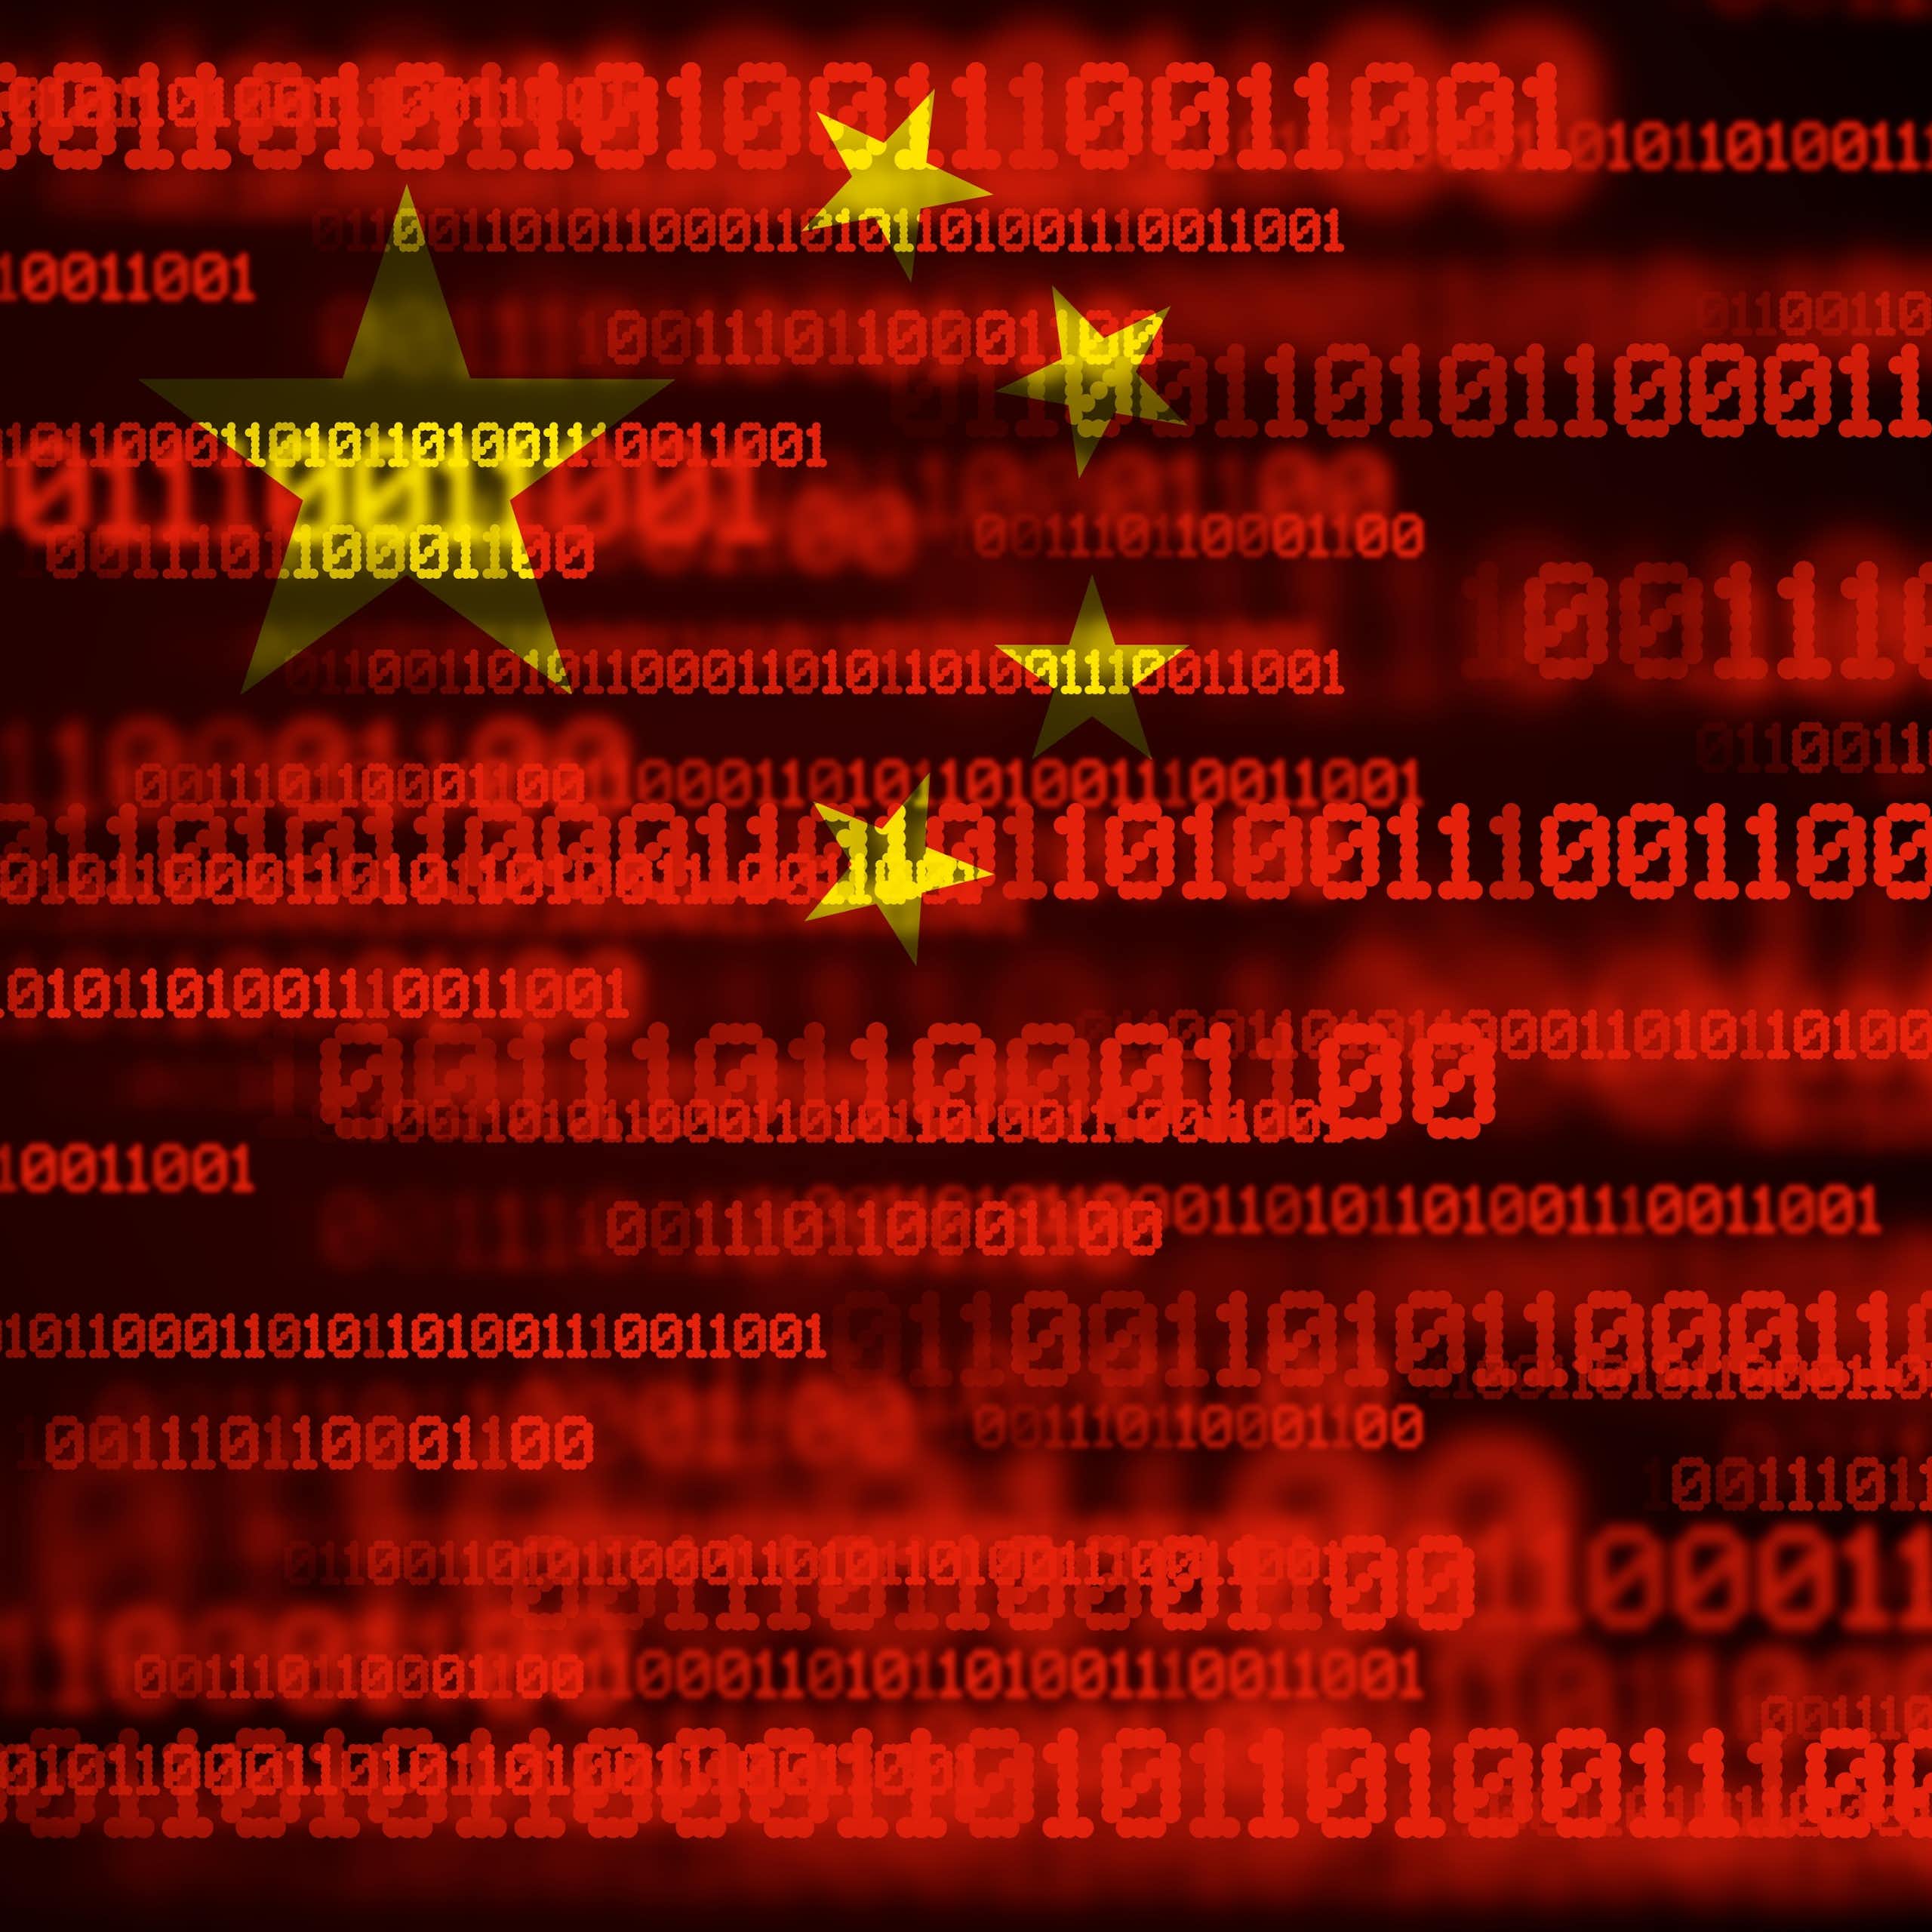 Lines of computer code against a red background with stars similar to the Chinese national flag. 